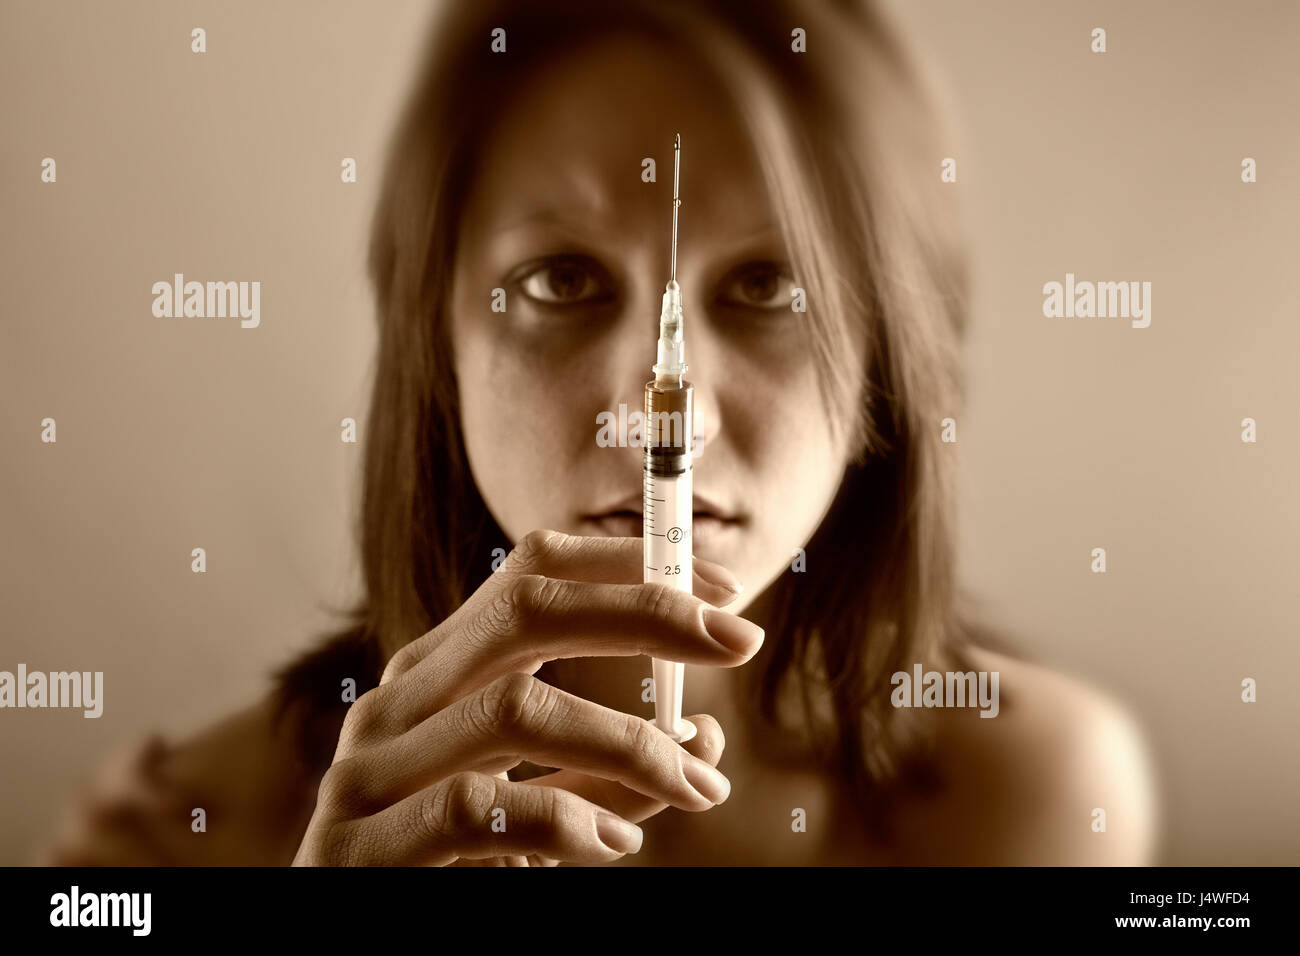 Young woman with drug addiction on dark background Stock Photo